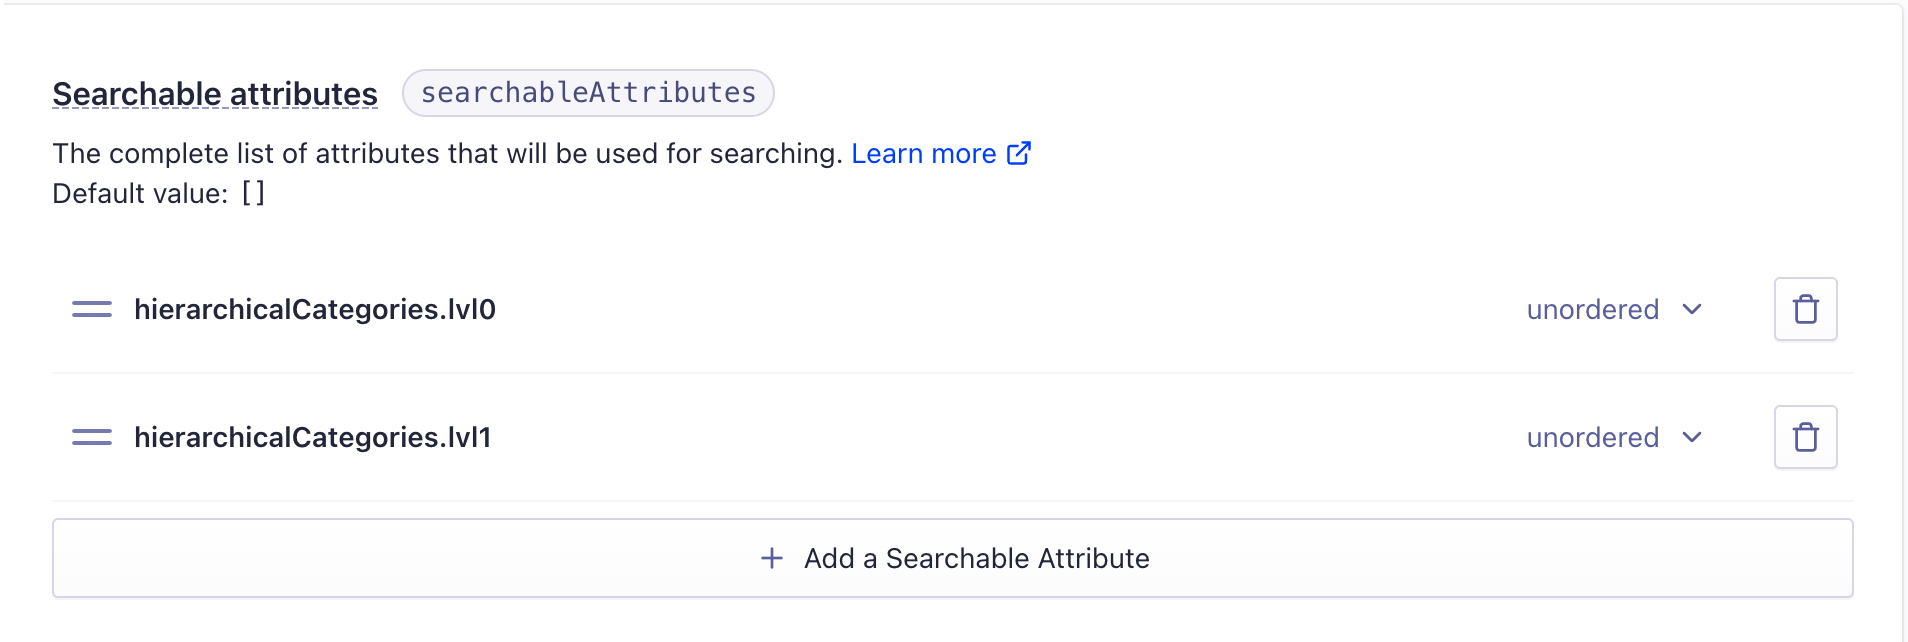 Searchable attributes section in Algolia. For hierarchical faceted search, add hierarchicalCategories.lvl0 and hierarchicalCategories.lvl1. Set them to unordered.